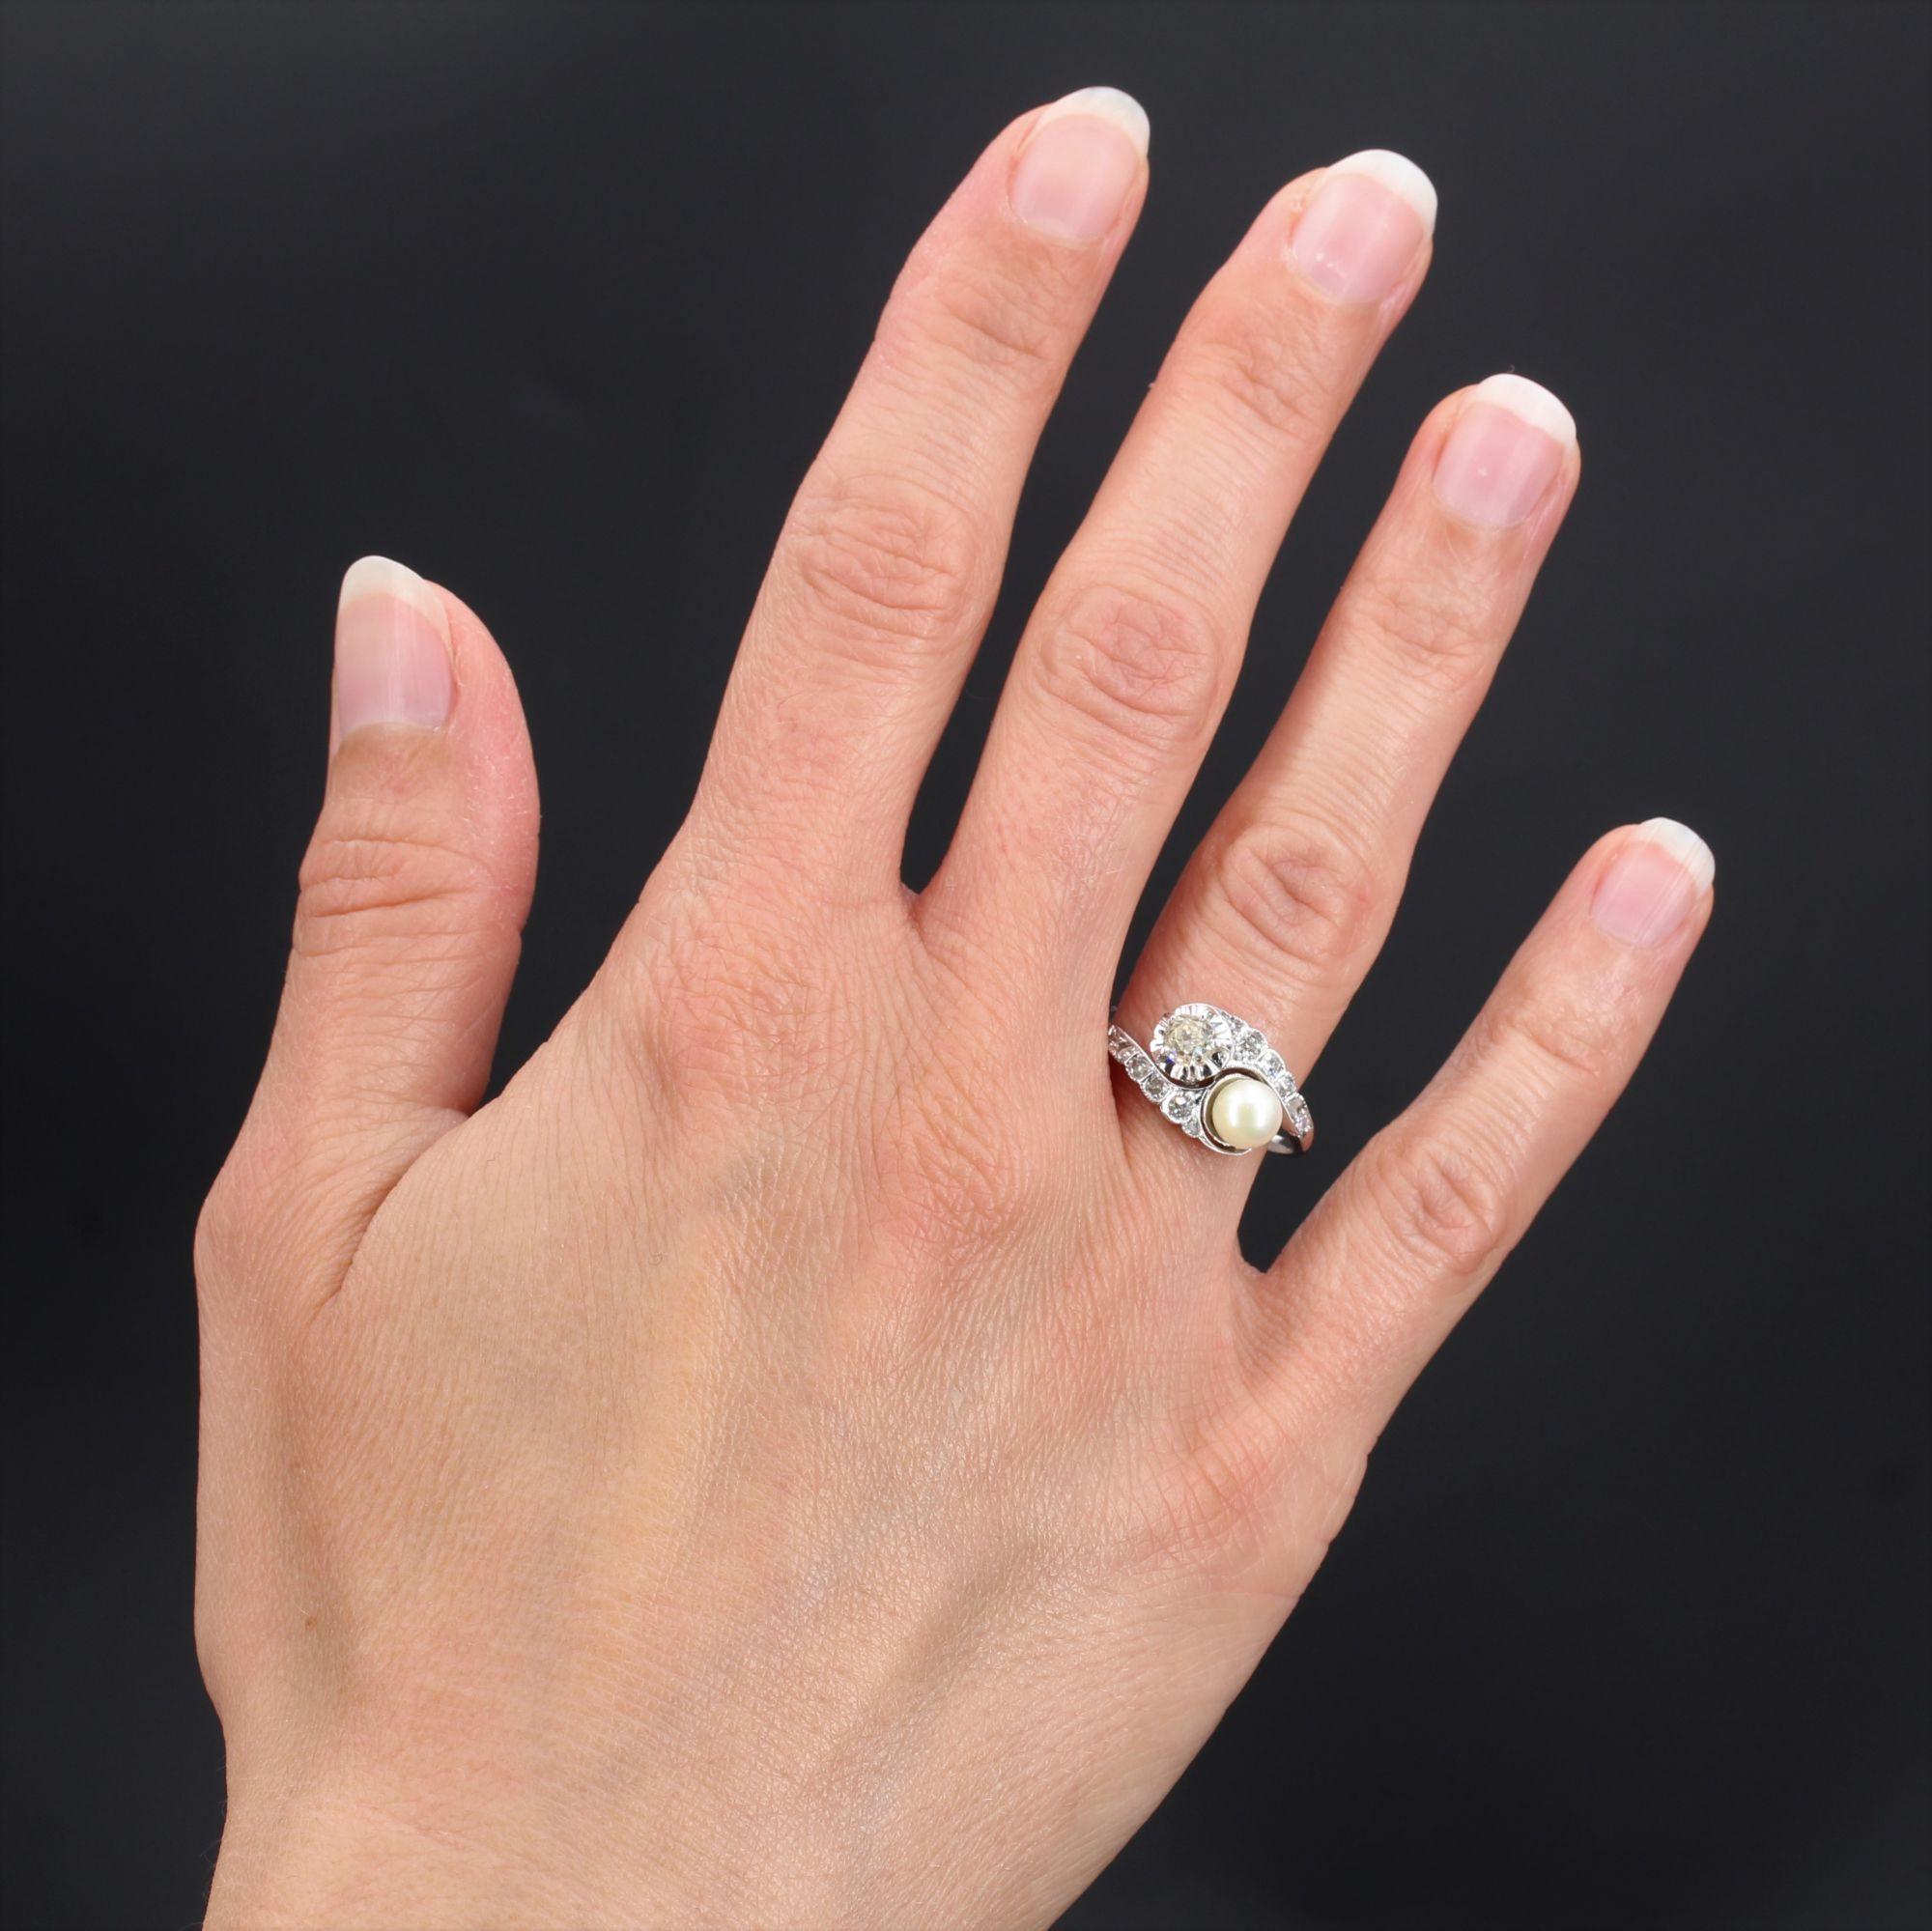 Ring in 18 karat white gold, owl hallmark.
Charming antique you and me jewel, this ring is set on its top of an antique cushion-cut diamond in illusion setting, and a cultured pearl of white orient. On both sides, the setting is decorated with a